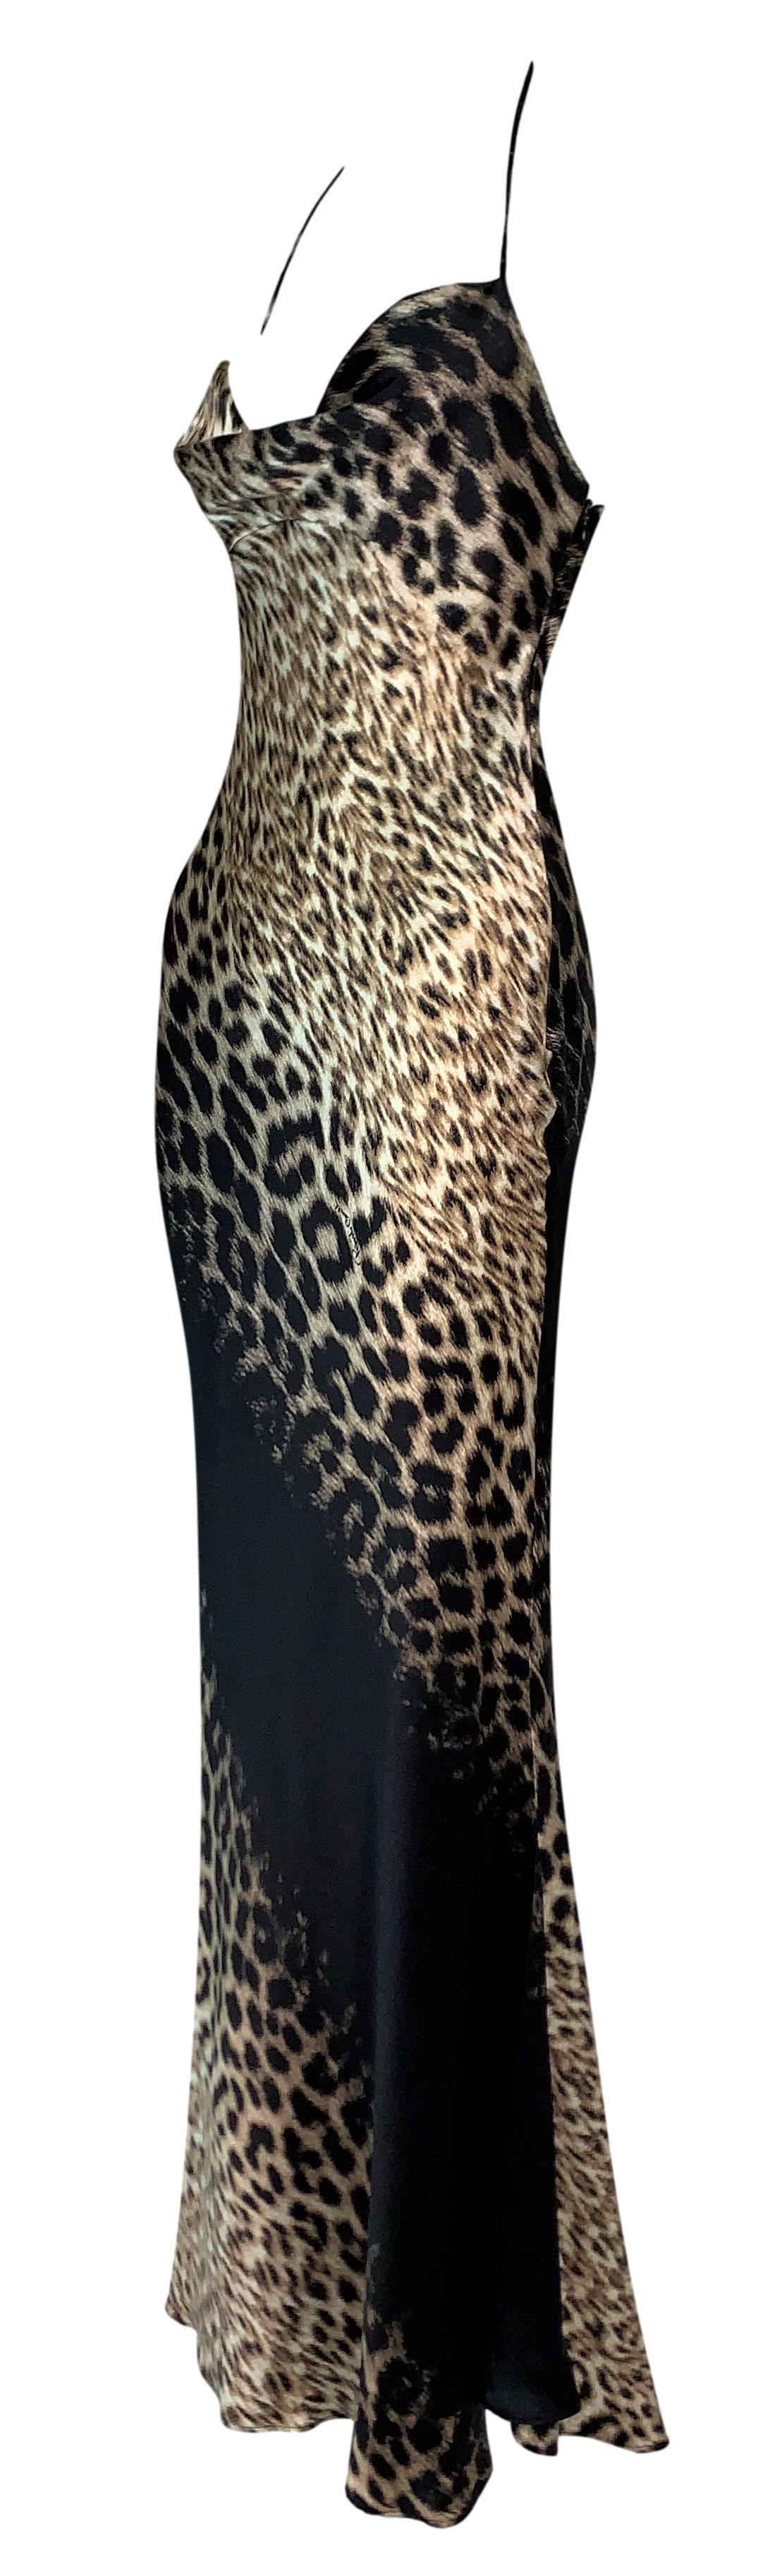 DESIGNER: F/W 2000 Roberto Cavalli Runway

Please contact us for more images or information

CONDITION: Good- no flaws!

FABRIC: Silk

COUNTRY: Italy

SIZE: S

MEASUREMENTS; provided as a courtesy only- not a guarantee of fit: 

Chest: 30-34